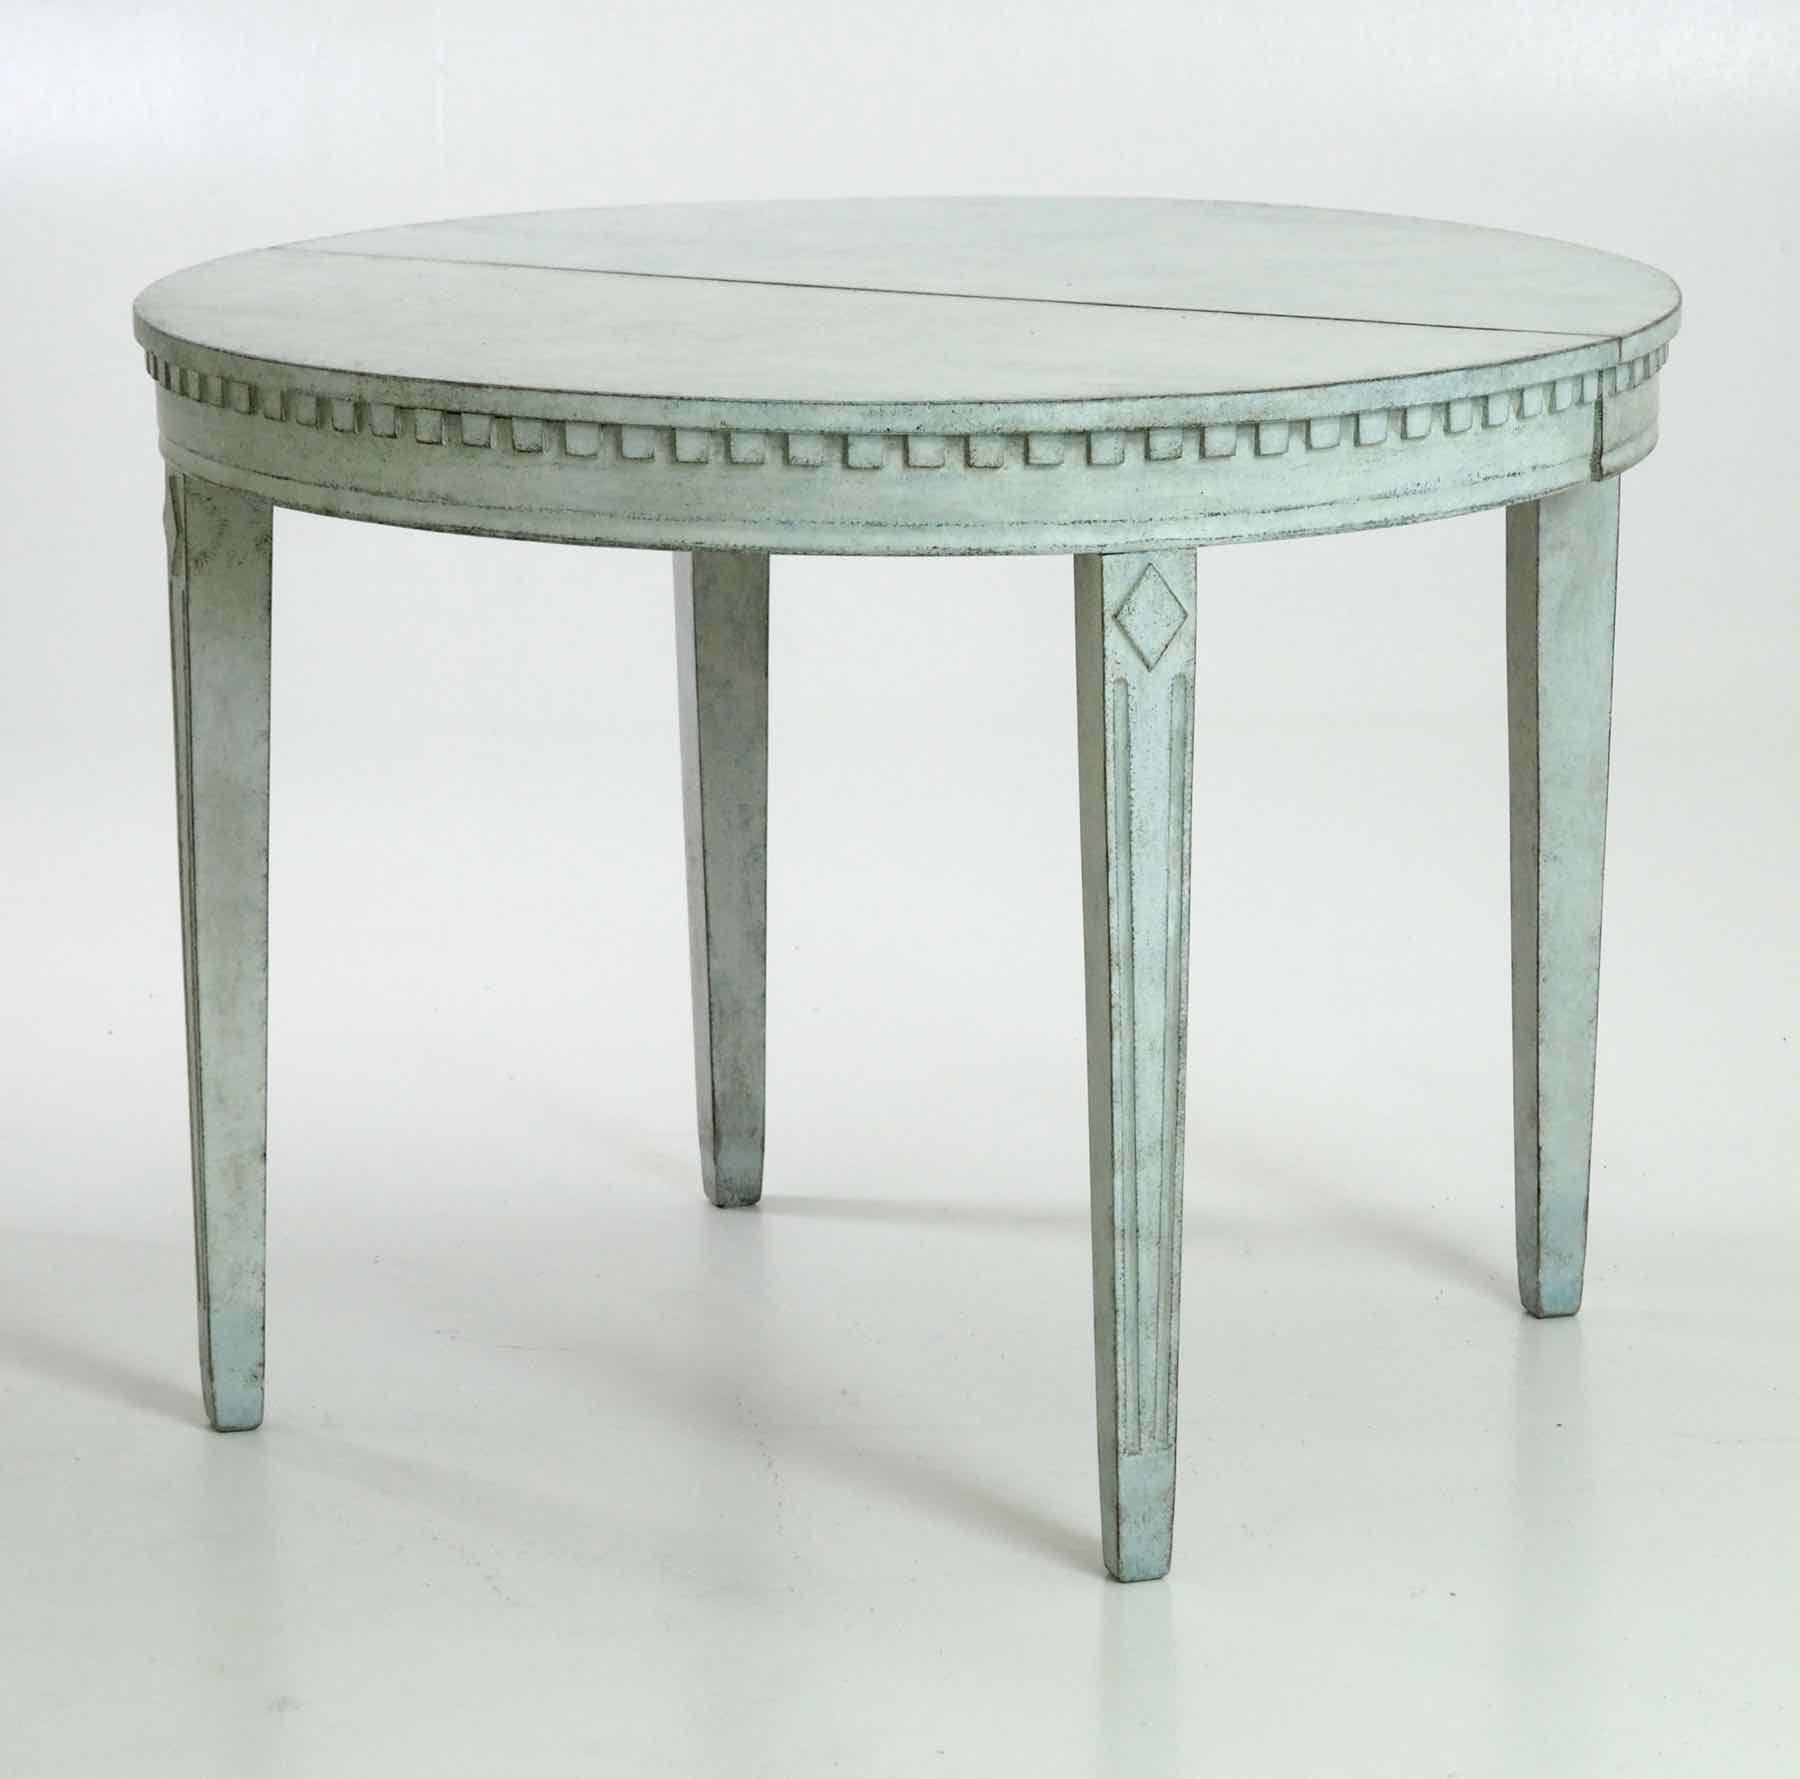 Stunning and rare 19th century fine Gustavian style extension table, with two leaves with carved apron, in a light blue/greyish color.
 